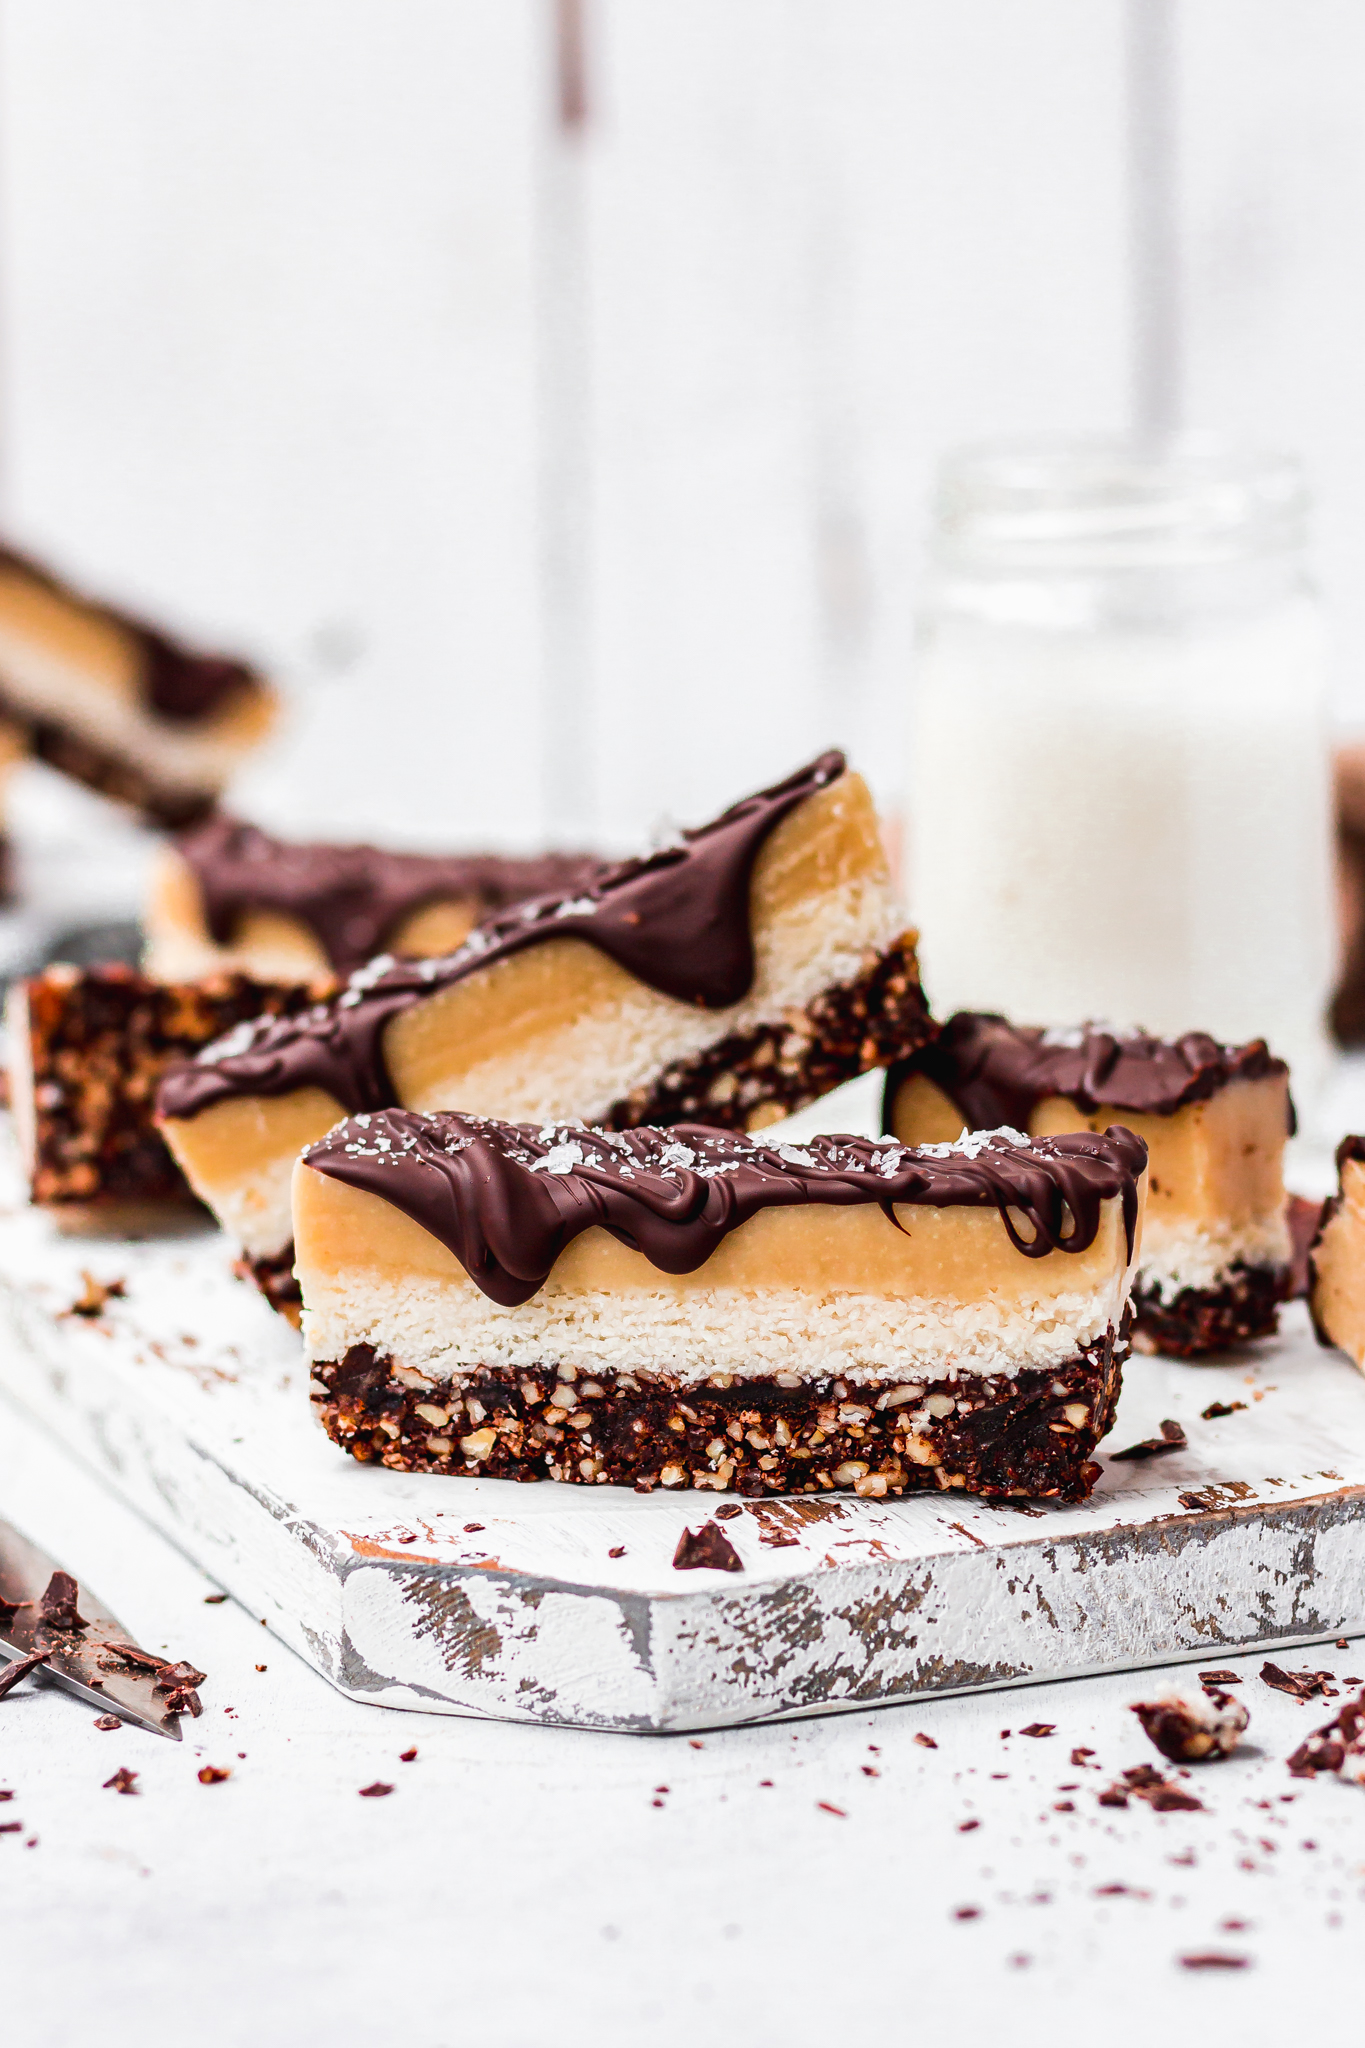 Salted Chocolate Coconut Caramel Slices stacked